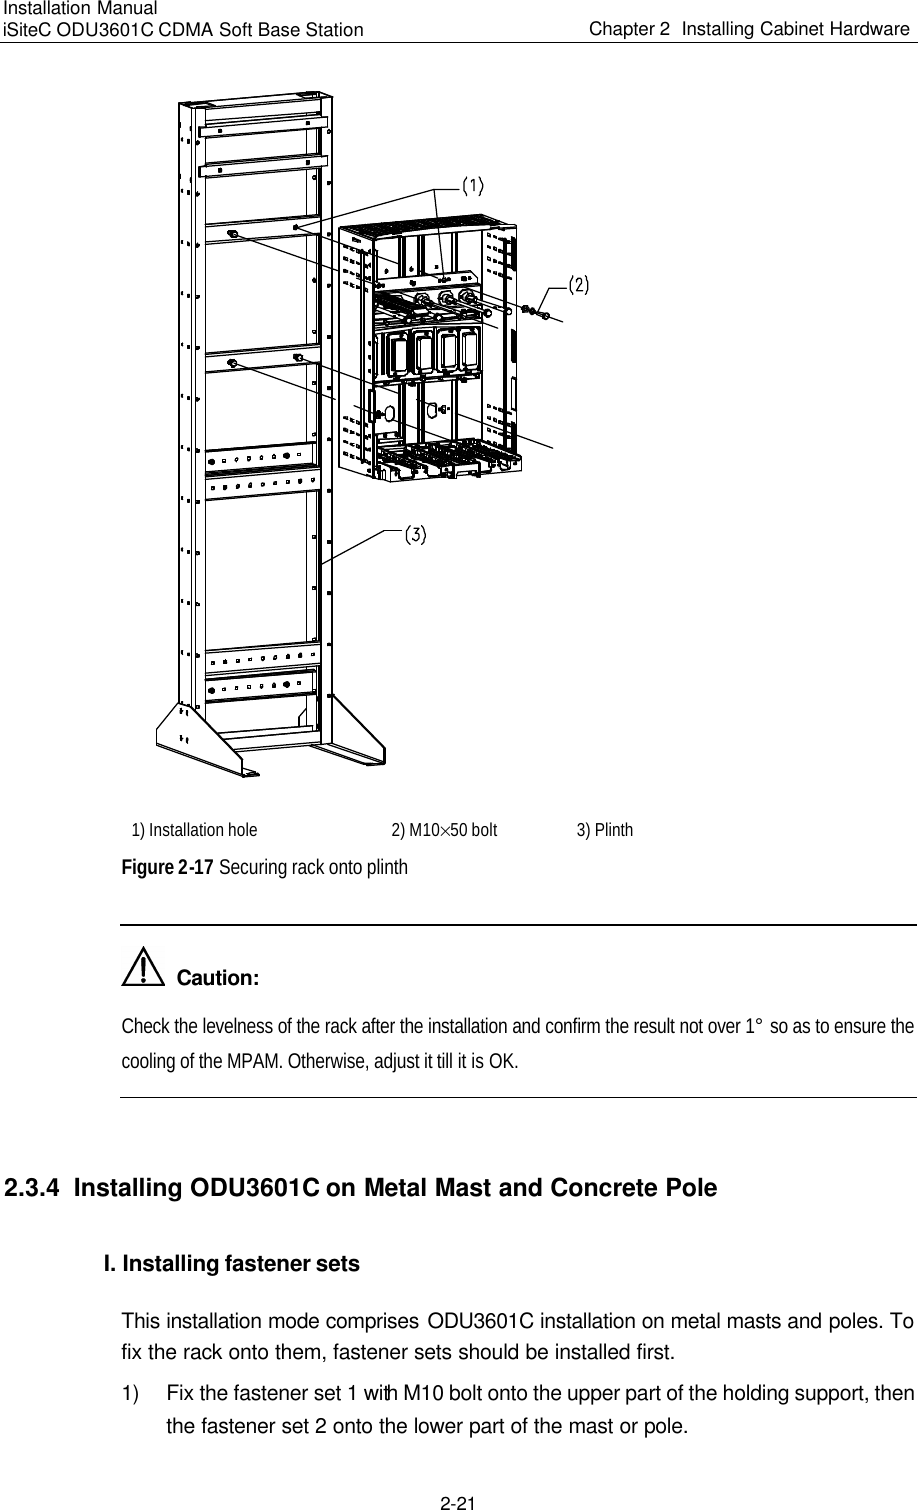 Installation Manual   iSiteC ODU3601C CDMA Soft Base Station Chapter 2  Installing Cabinet Hardware  2-21   1) Installation hole  2) M10%50 bolt  3) Plinth  Figure 2-17 Securing rack onto plinth    Caution: Check the levelness of the rack after the installation and confirm the result not over 1° so as to ensure the cooling of the MPAM. Otherwise, adjust it till it is OK.   2.3.4  Installing ODU3601C on Metal Mast and Concrete Pole I. Installing fastener sets  This installation mode comprises ODU3601C installation on metal masts and poles. To fix the rack onto them, fastener sets should be installed first.  1) Fix the fastener set 1 with M10 bolt onto the upper part of the holding support, then the fastener set 2 onto the lower part of the mast or pole. 